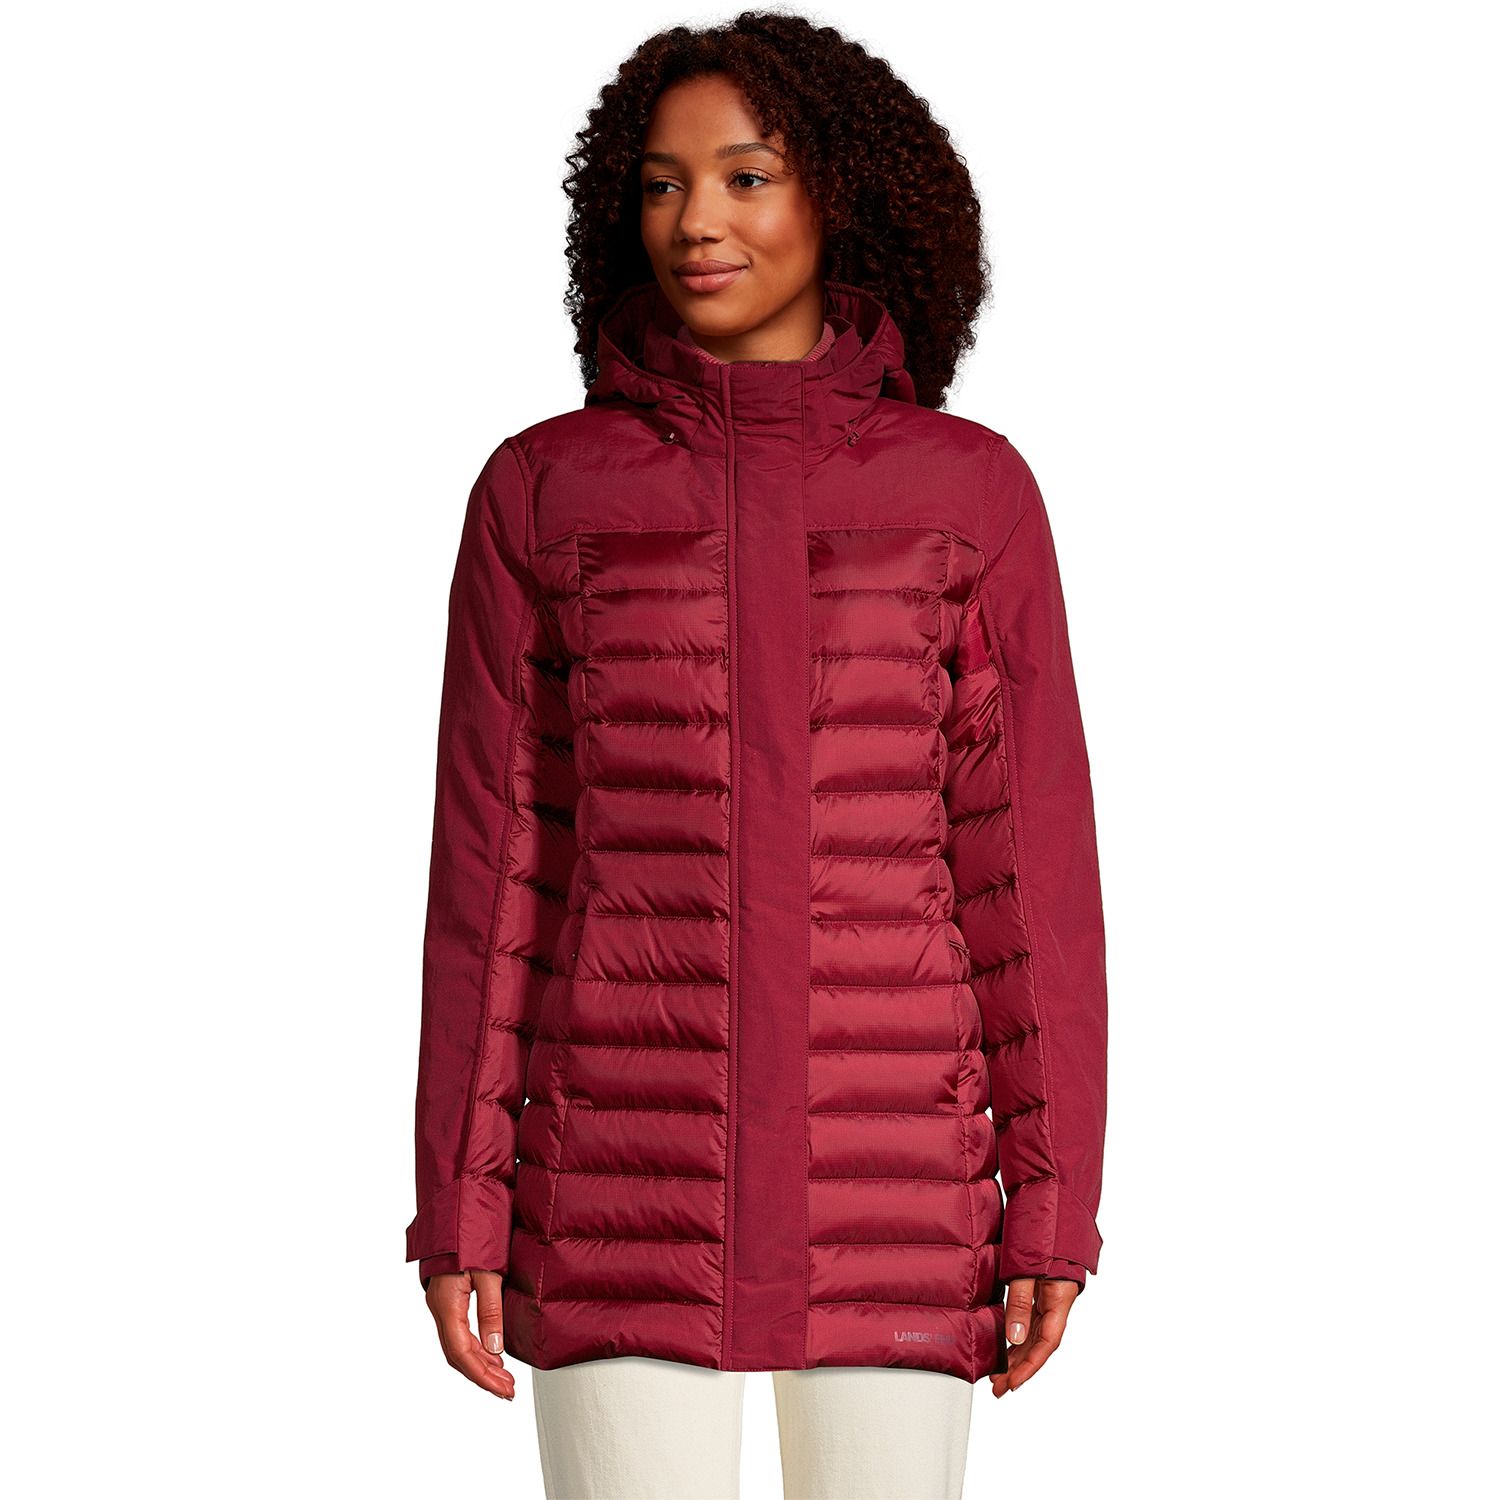 Image for Lands' End Women's Squall Insulated Down Winter Coat at Kohl's.